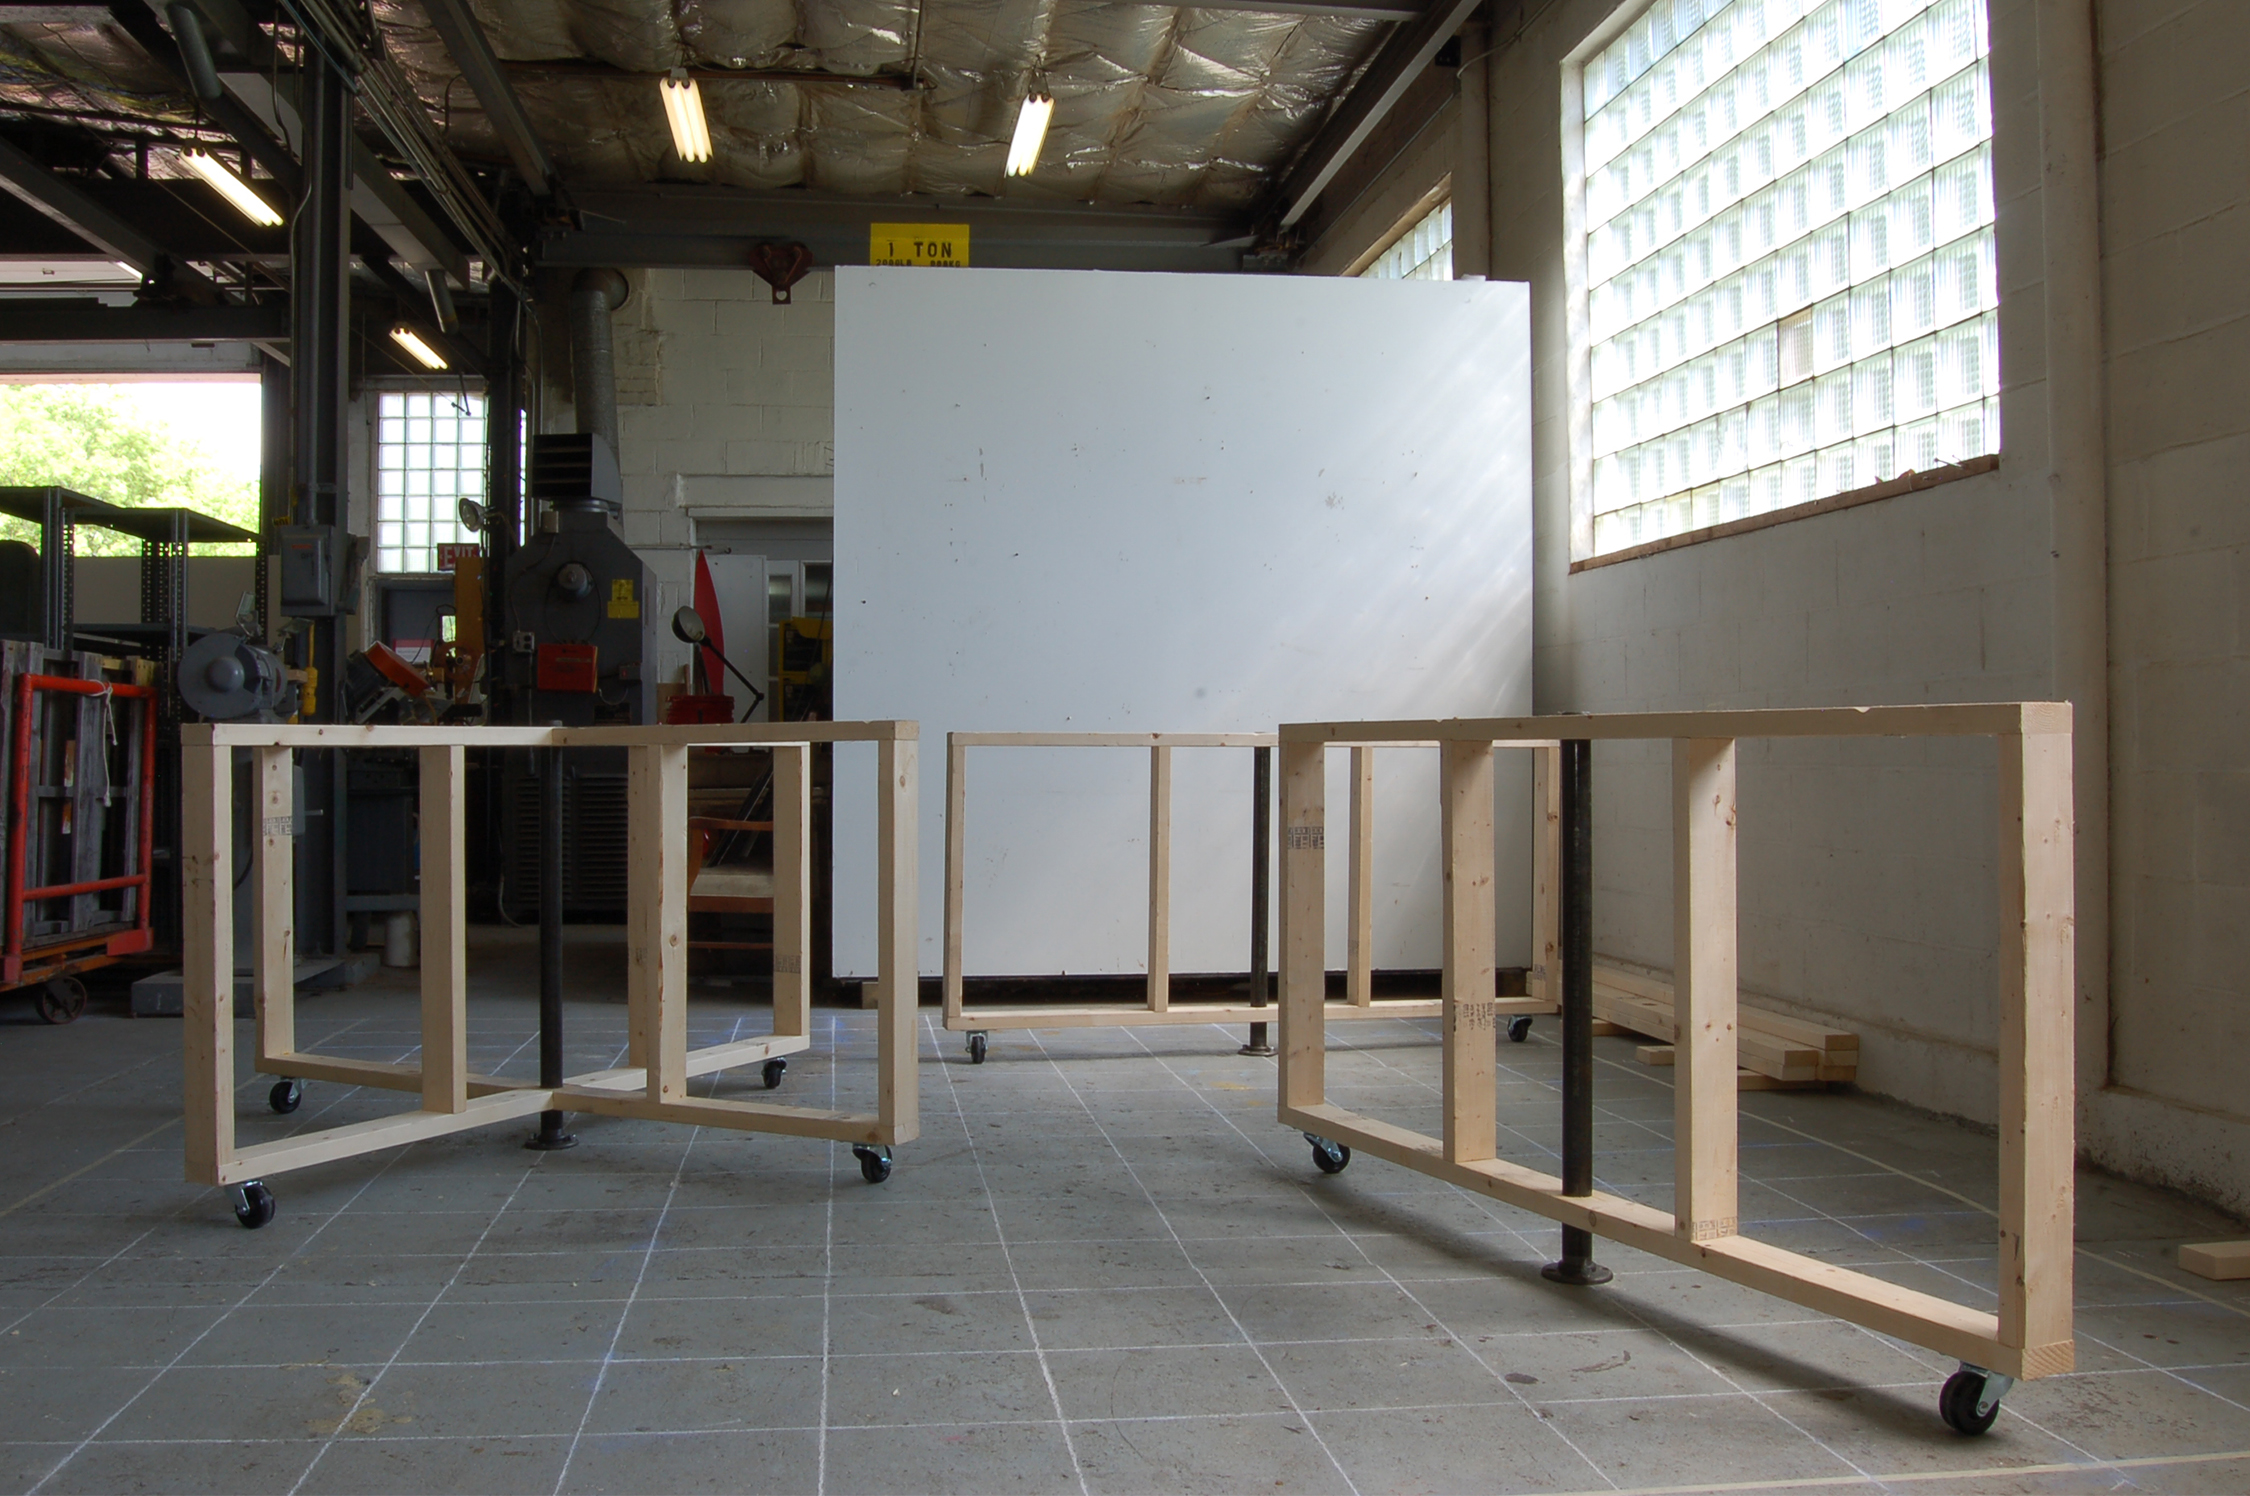   Untitled (rotating walls) , 2011, studio study for mixed media interactive installation, installation dimensions variable. 